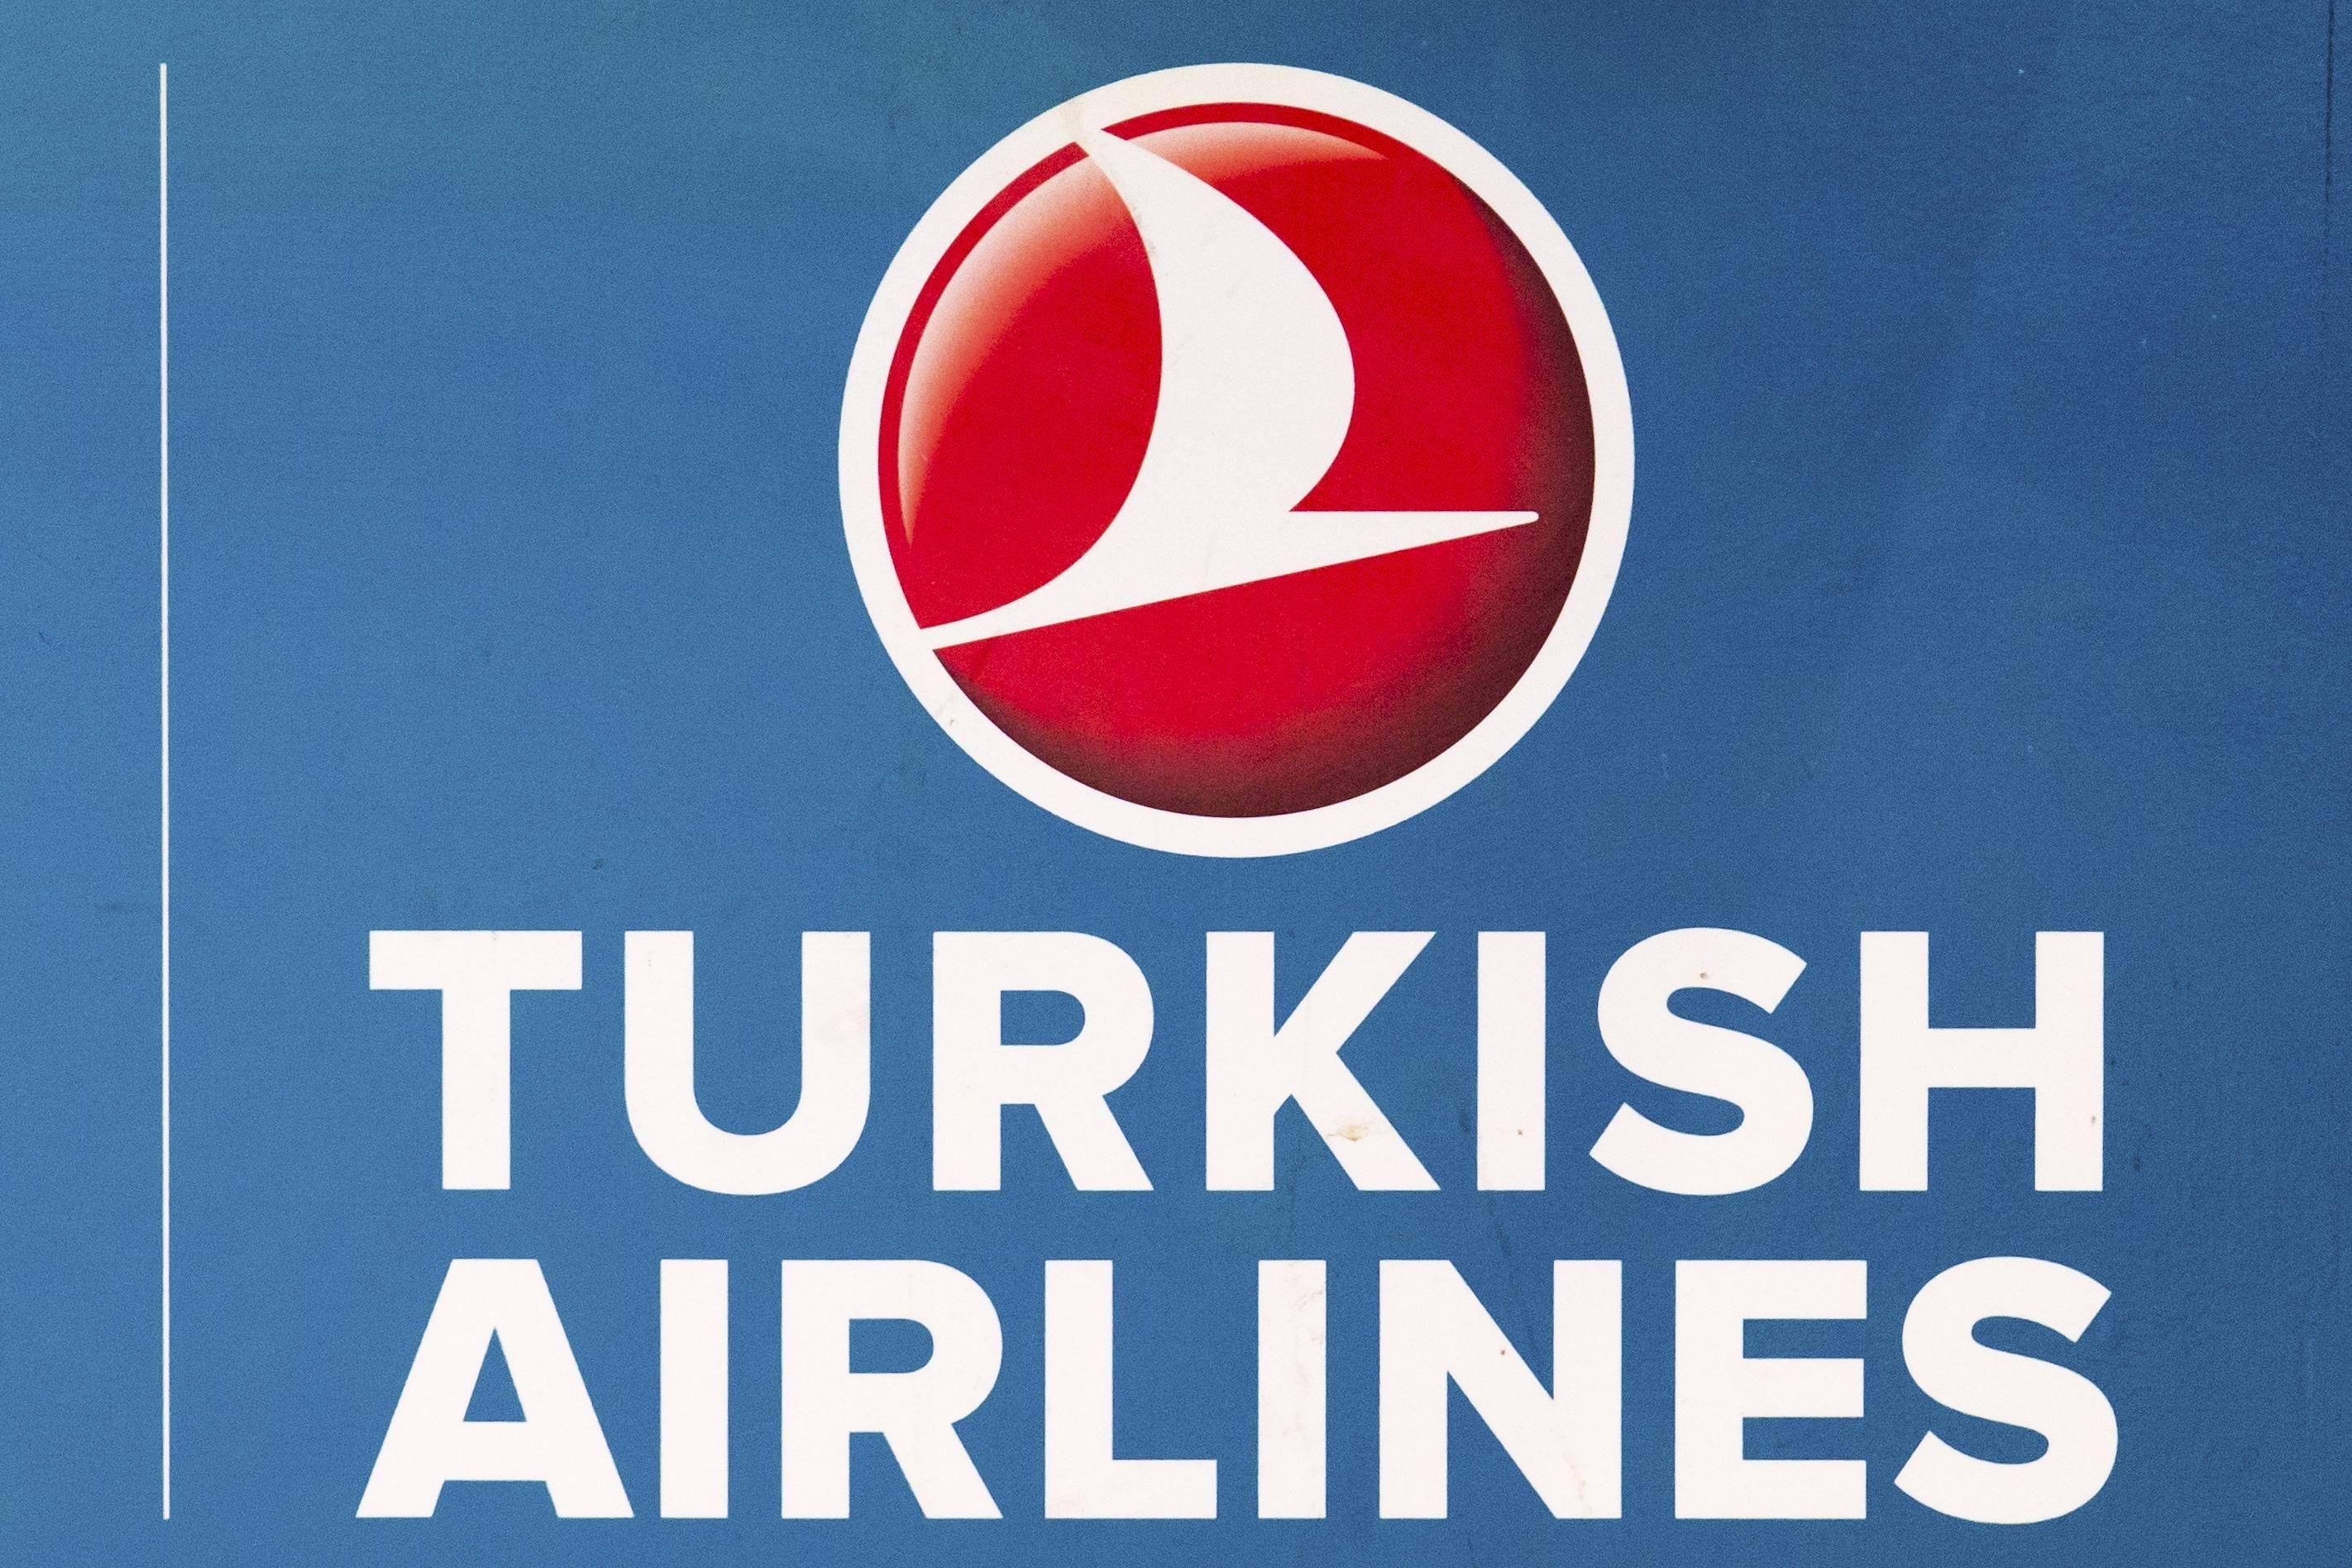 Turkish Airlines Logo - Houston-Istanbul Turkish Airlines flight diverts to Ireland amid in ...